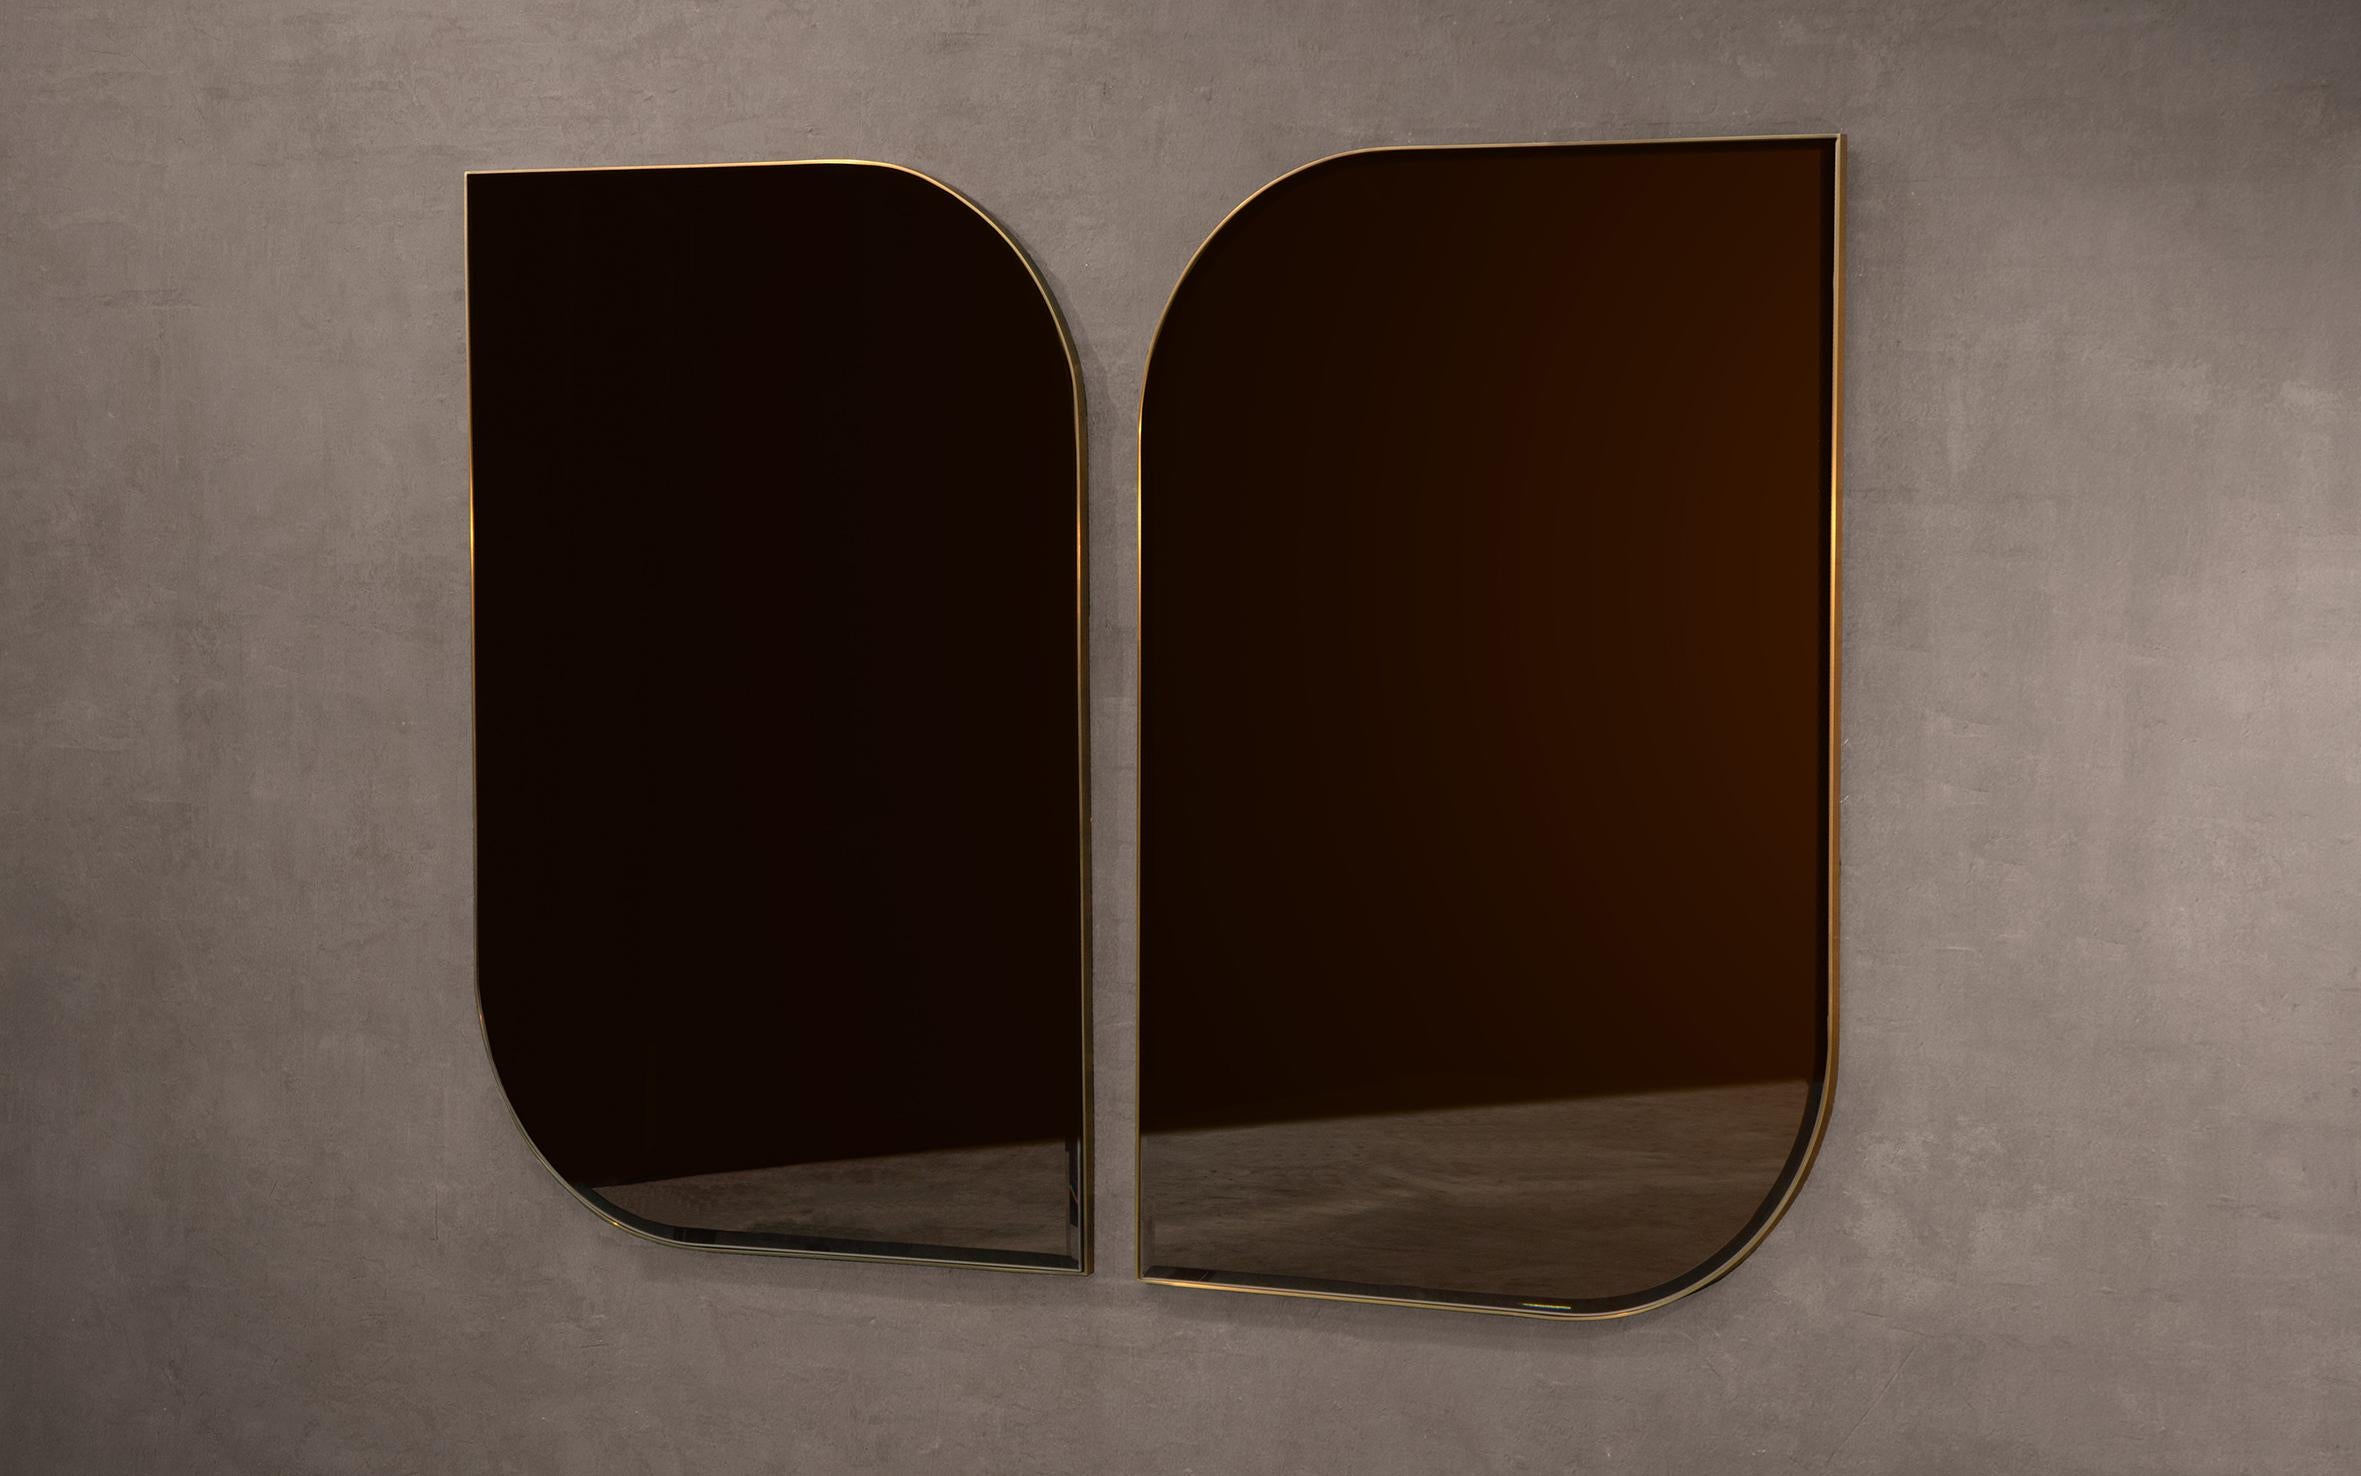 A handcrafted wall mirror in patinated brass and bevelled, bronze tinted glass. Available in left and right handed options for the opportunity of pairing two together.

Can be hung in both portrait and landscape orientations. Supplied with two screw